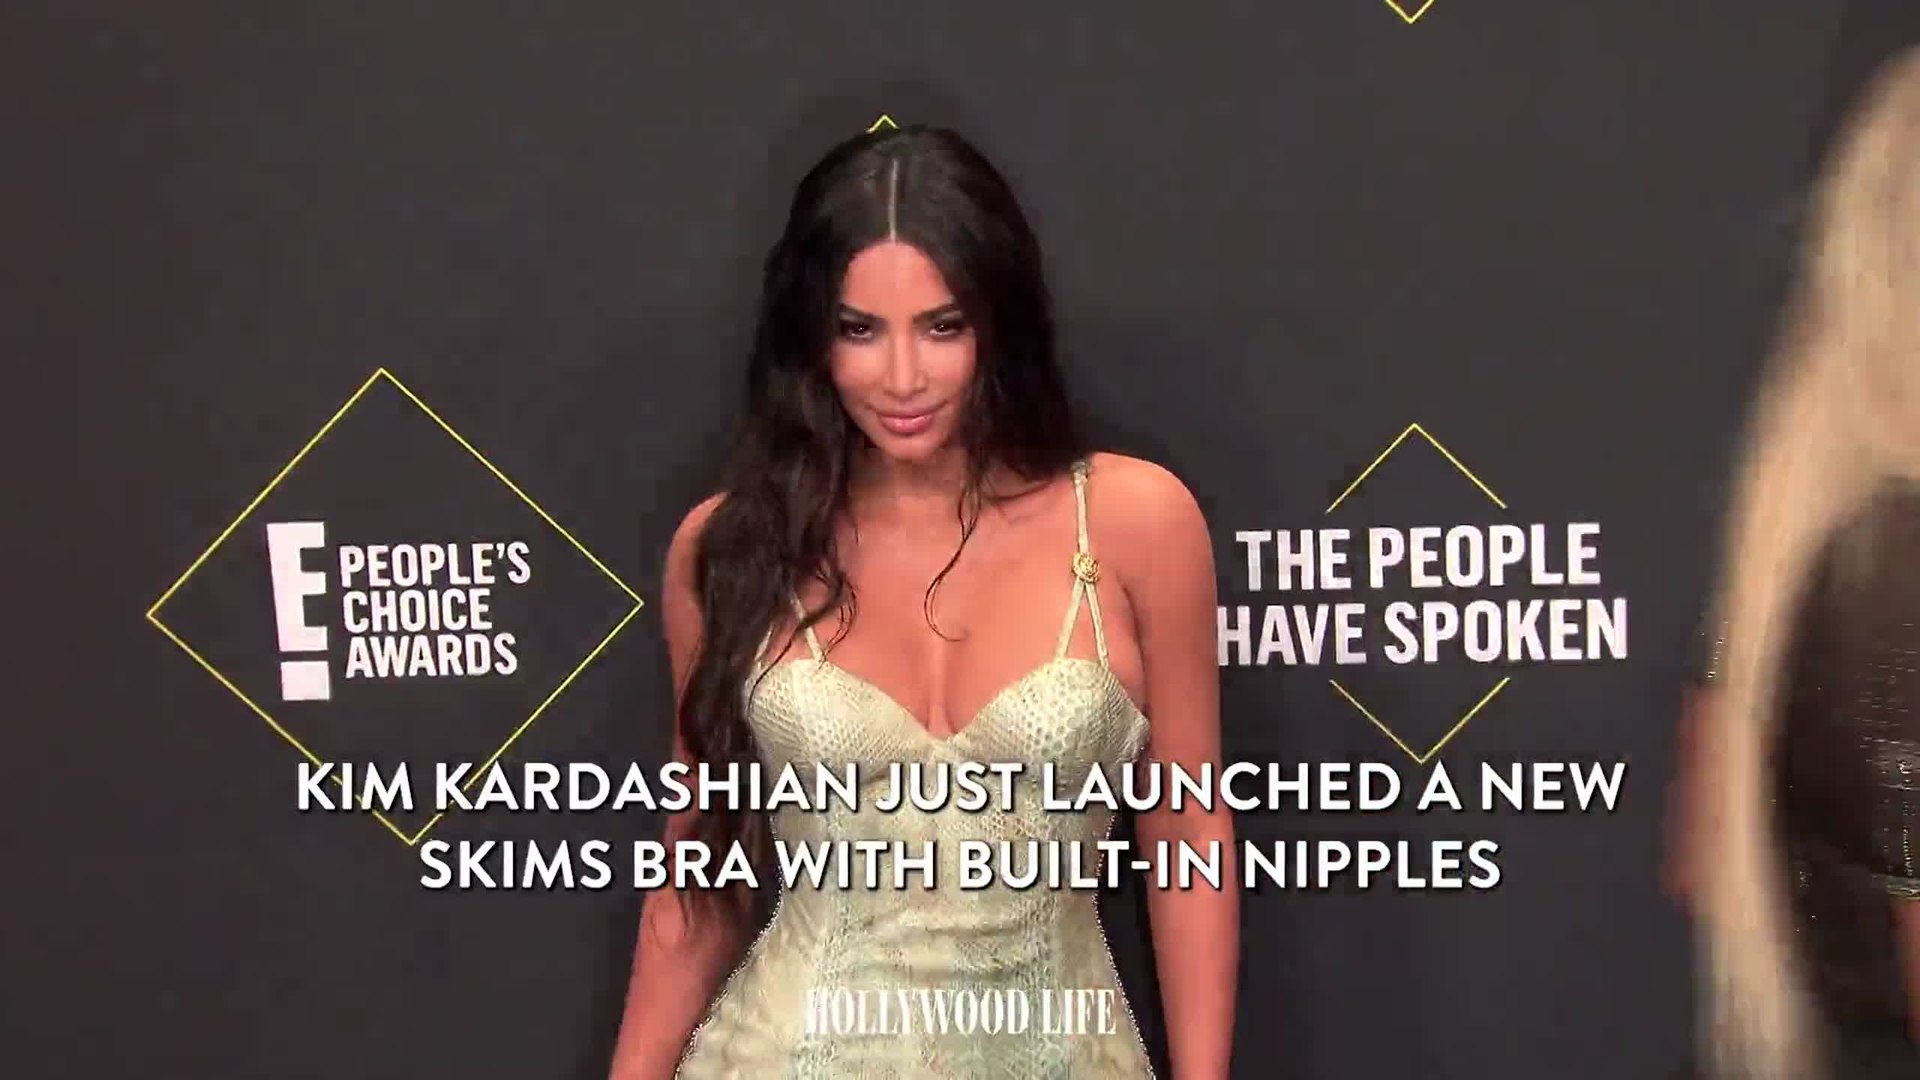 Kim Kardashian Just Launched a New Skims Bra With Built-in Nipples - video  Dailymotion